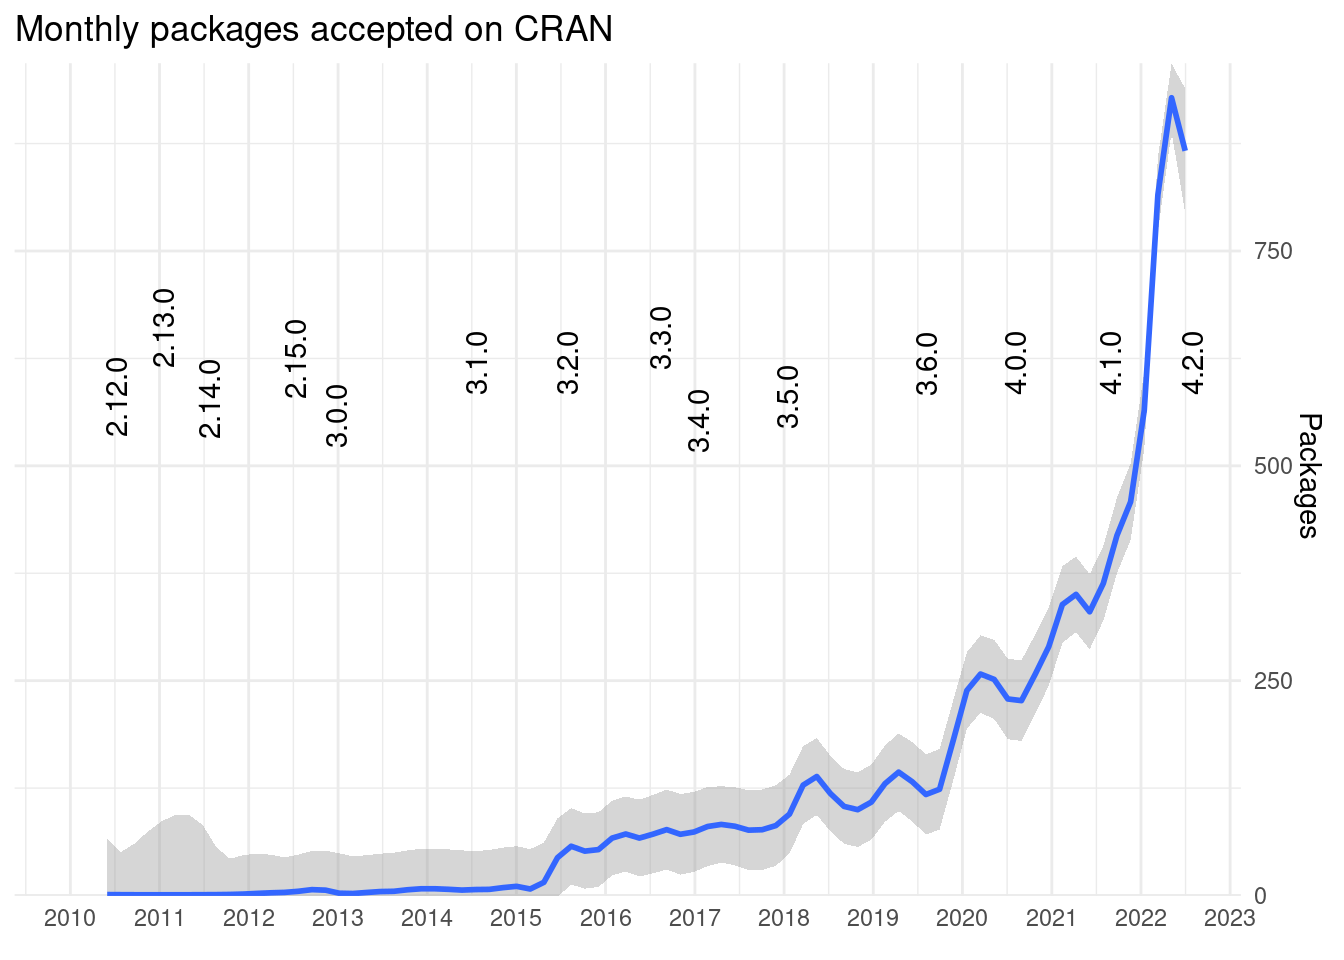 ggplot figure with the monthly published packages. till 2015 it raises very slowly, then in is around 50 monthly packages and there are some wobbles. In 2022 it raised to over 800 packages.